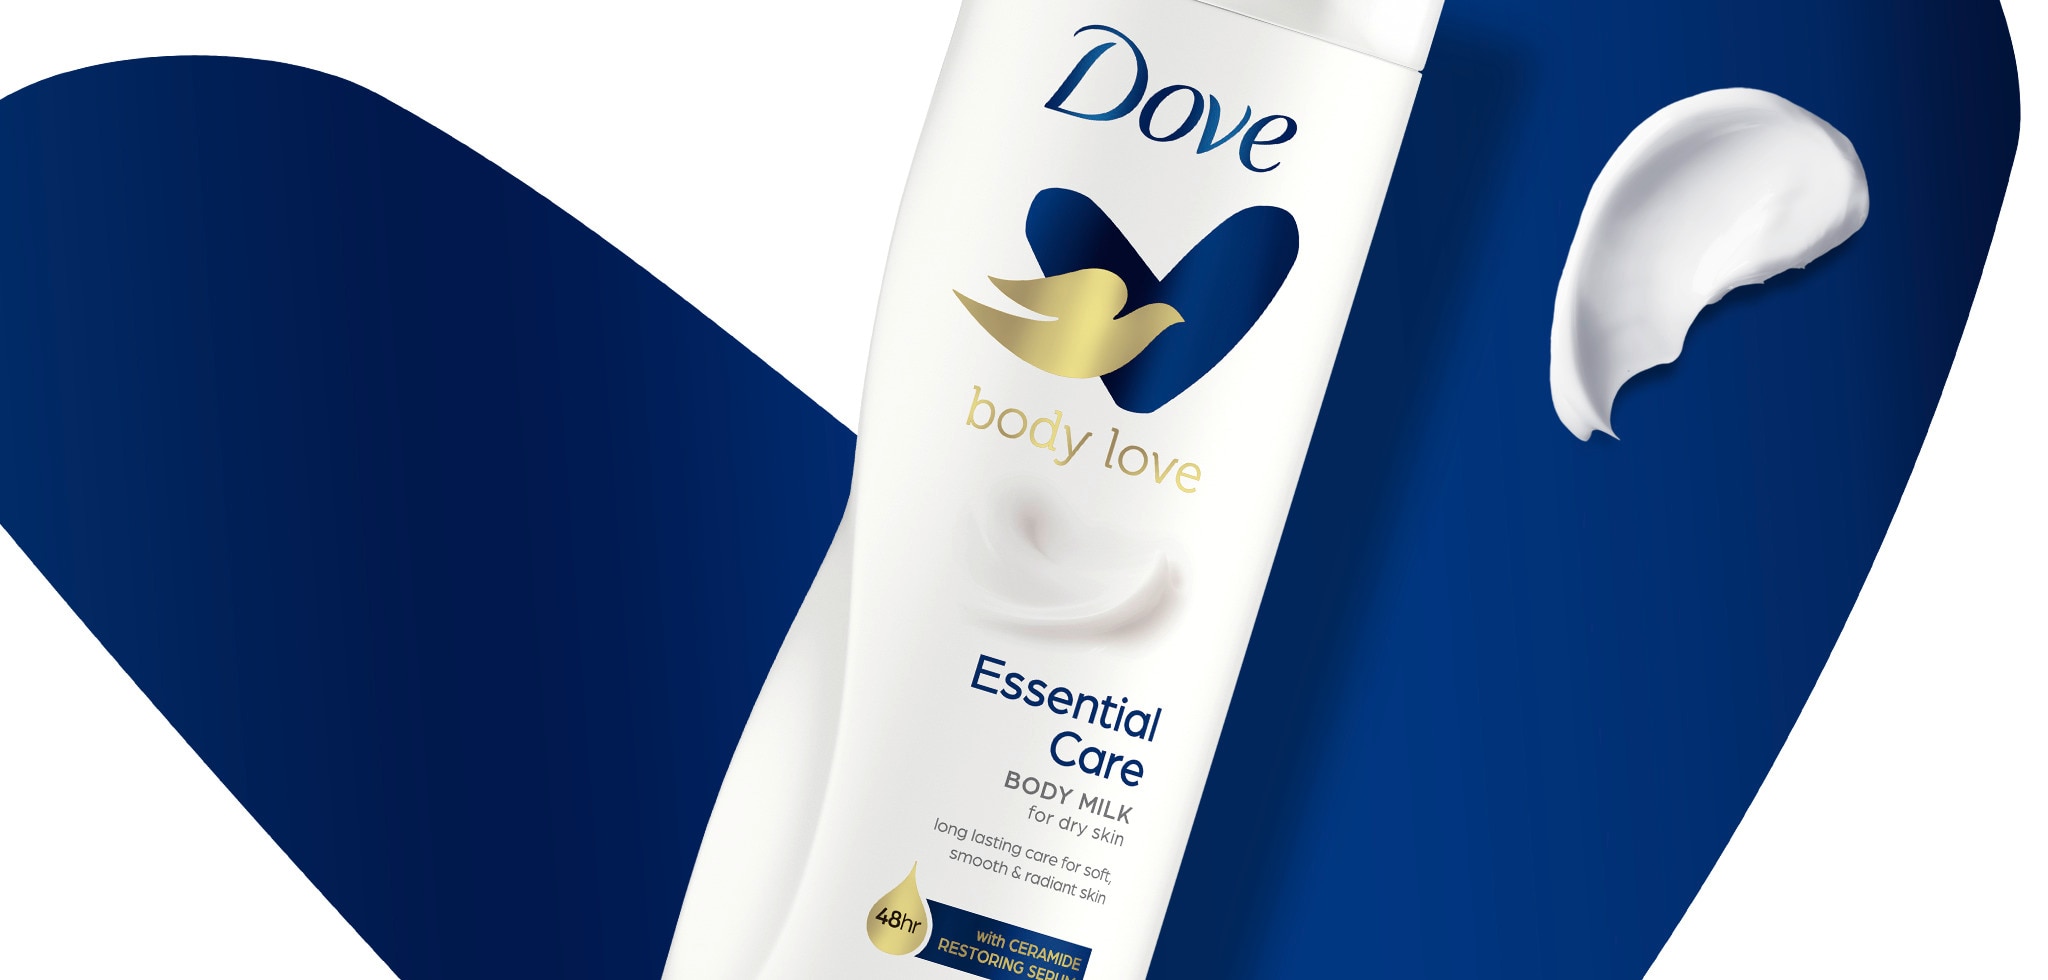 Dove Mature skin products